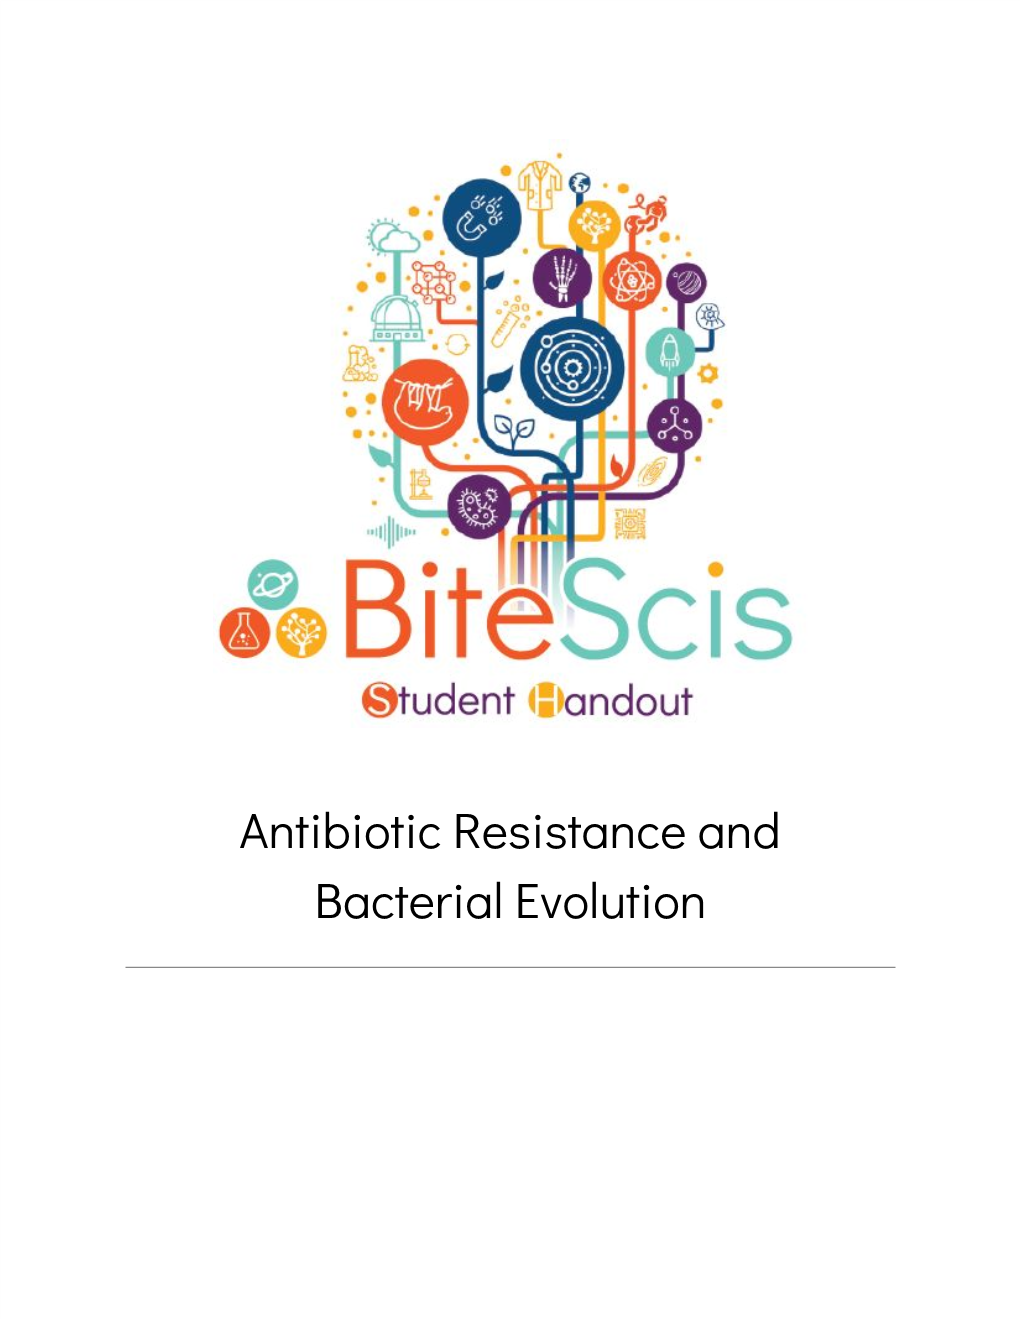 Antibiotic Resistance and Bacterial Evolution